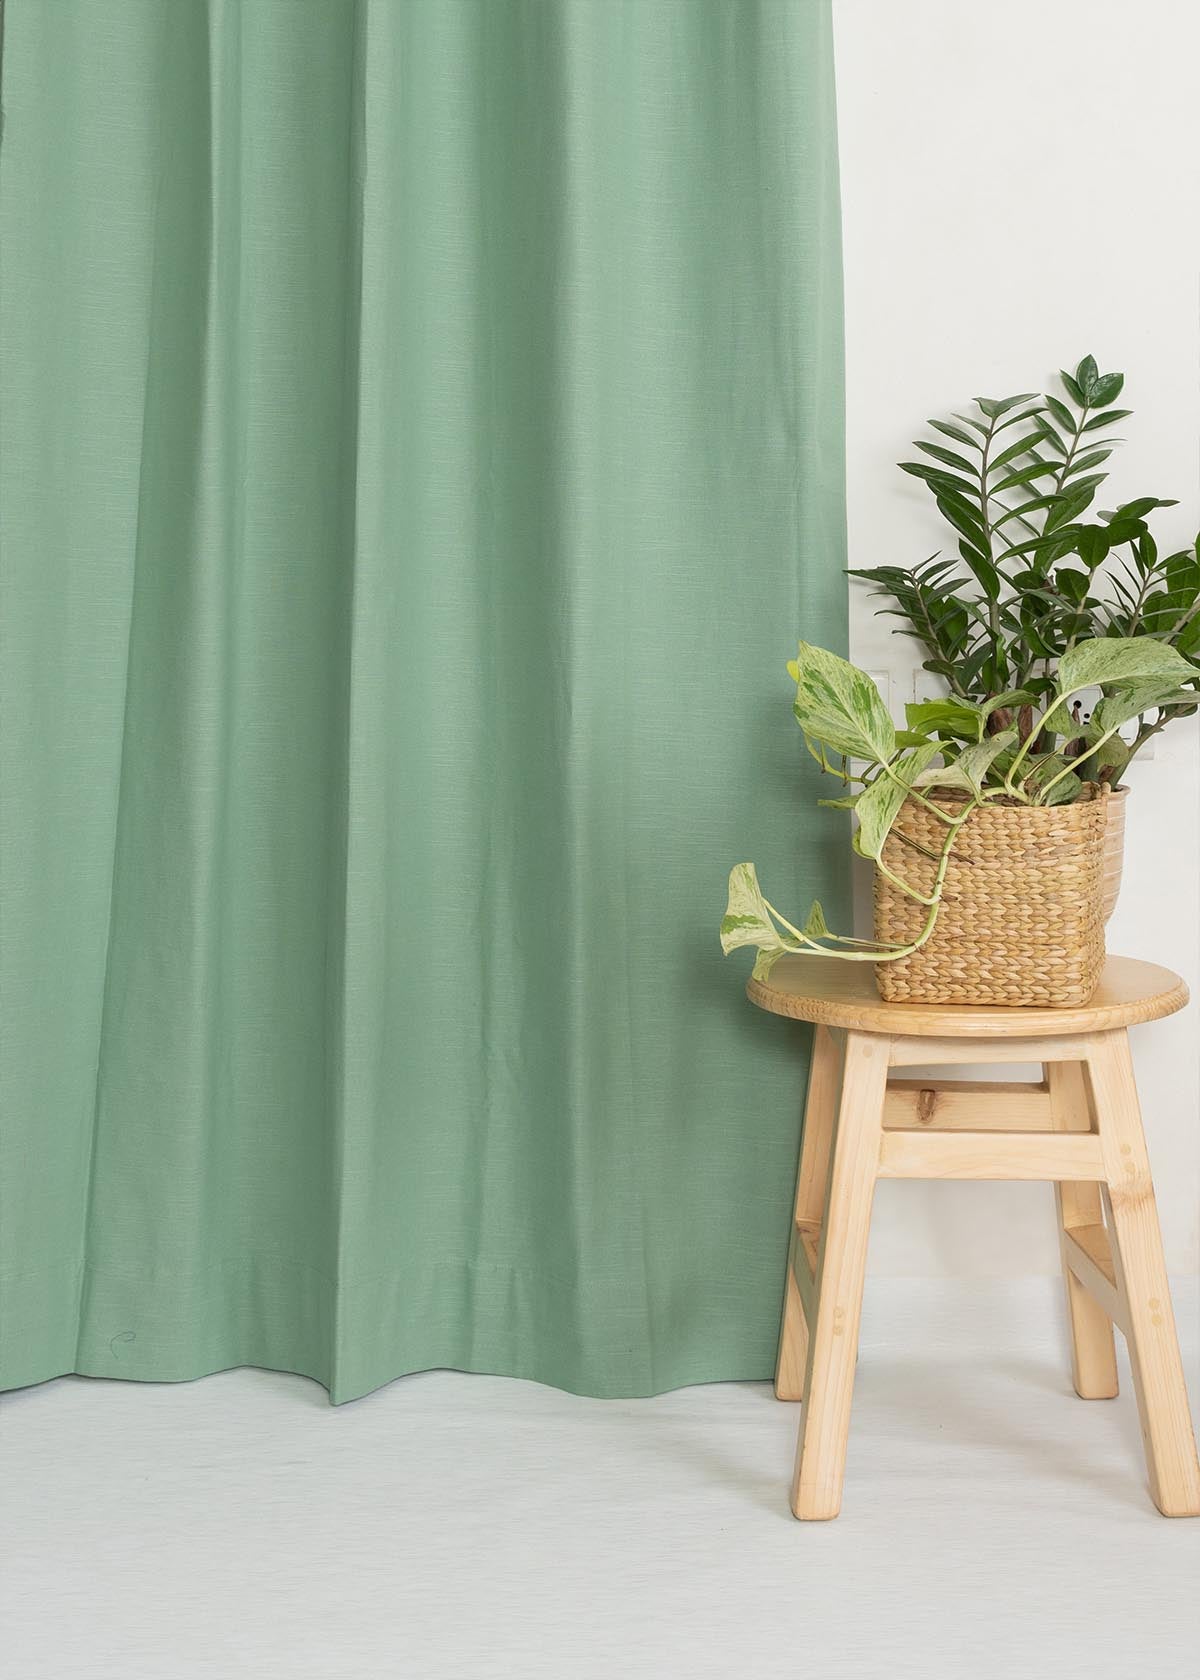 Solid Sage green 100% cotton plain curtain for bedroom - Room darkening - Pack of 1